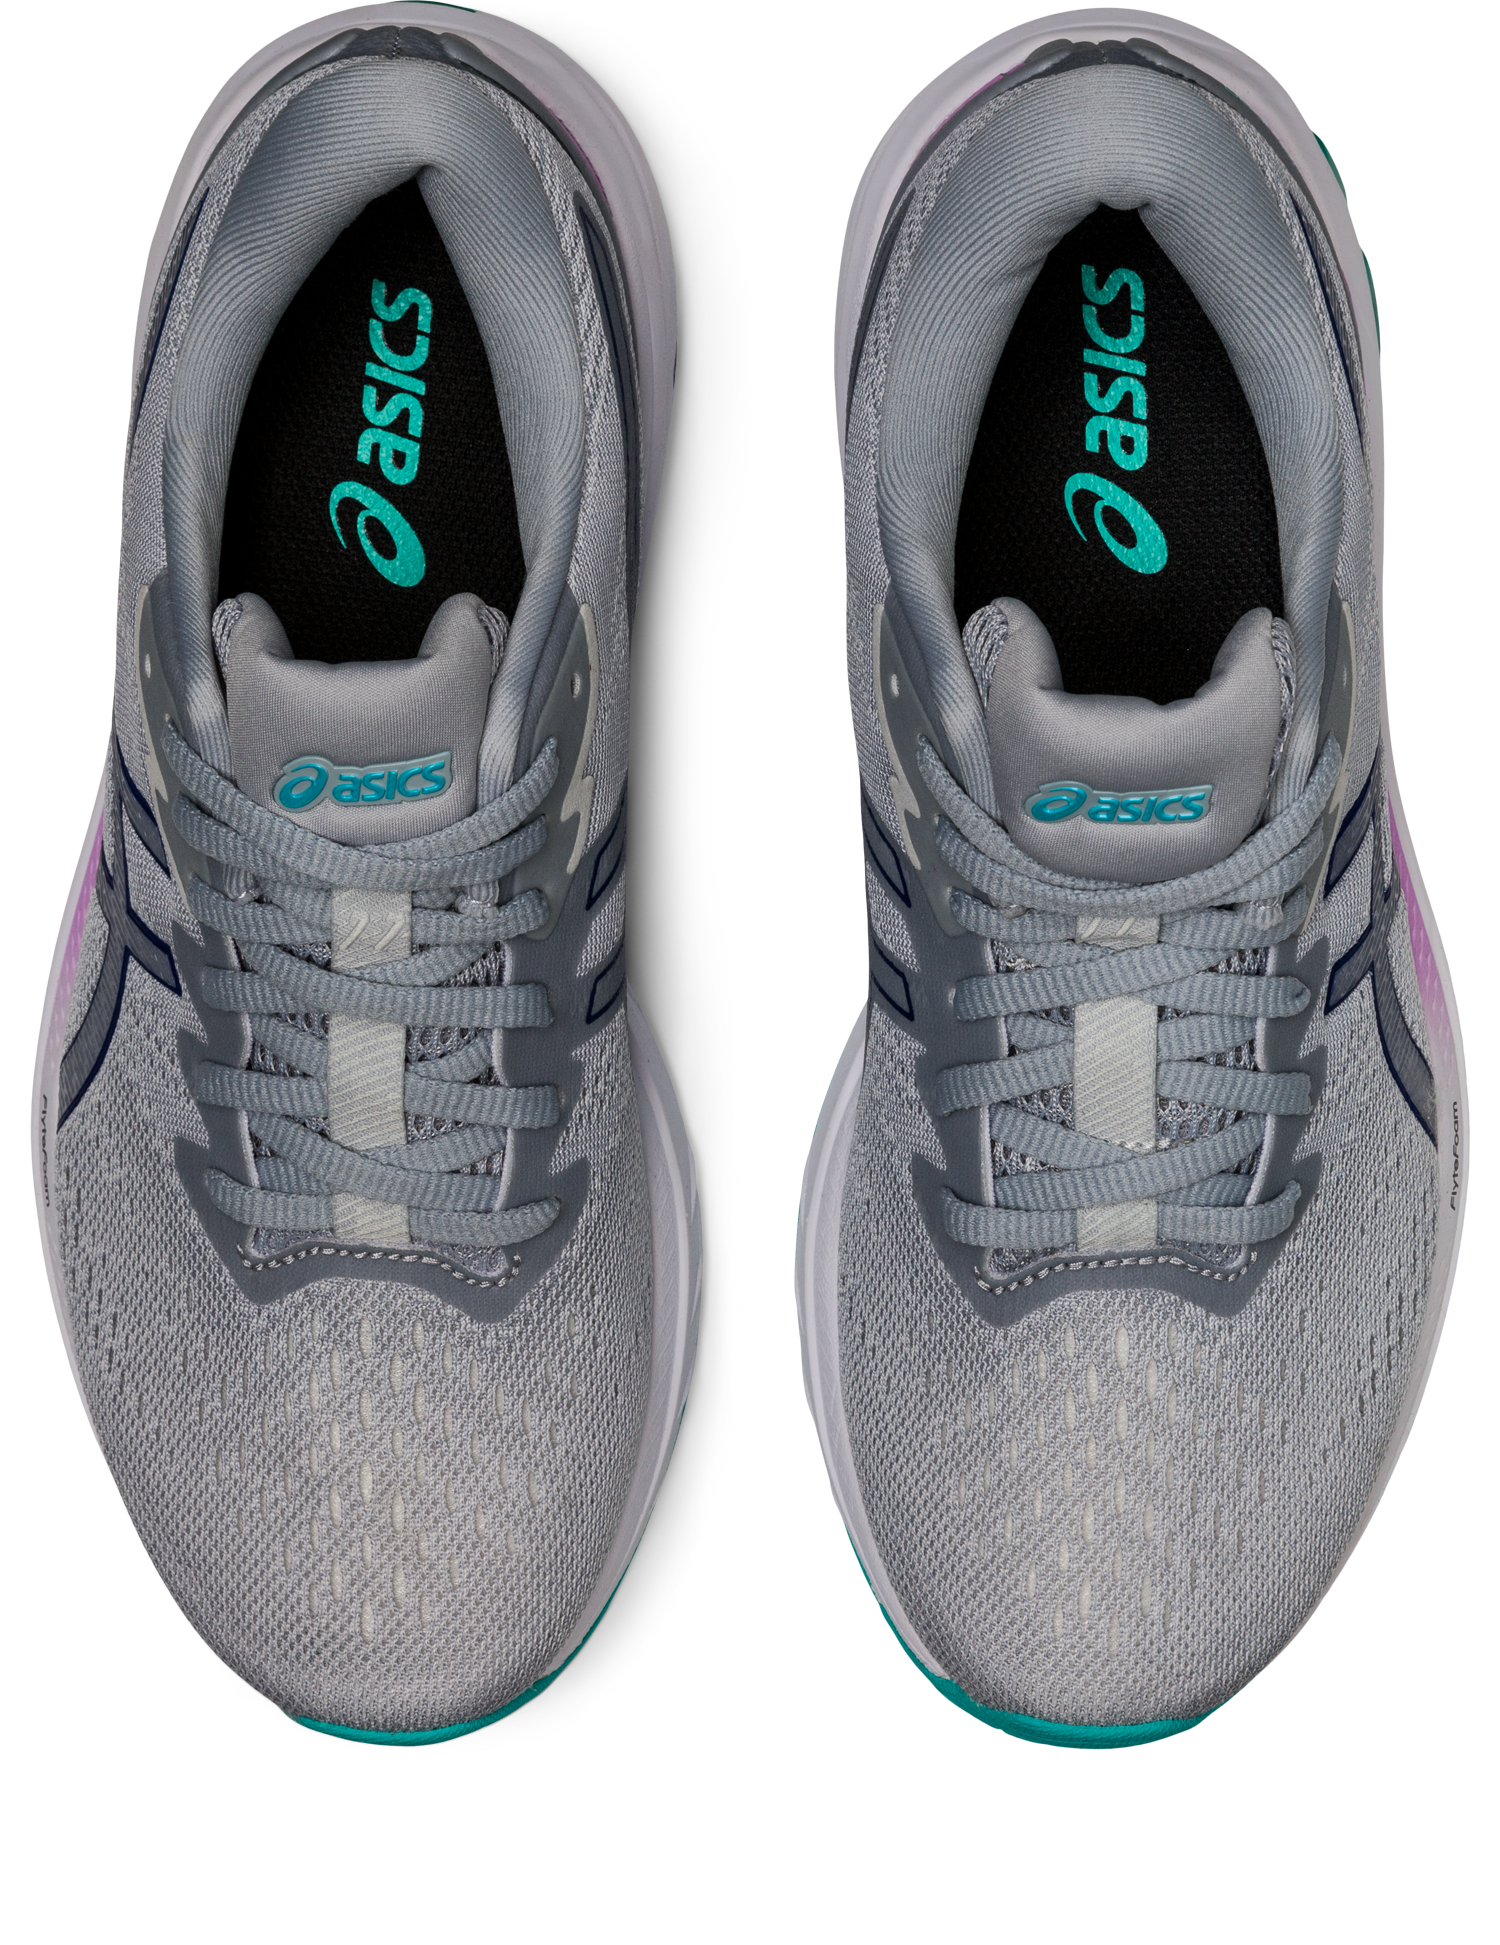 Asics Women's GT-1000 11 Running Shoes in Glacier Grey/Dive Blue